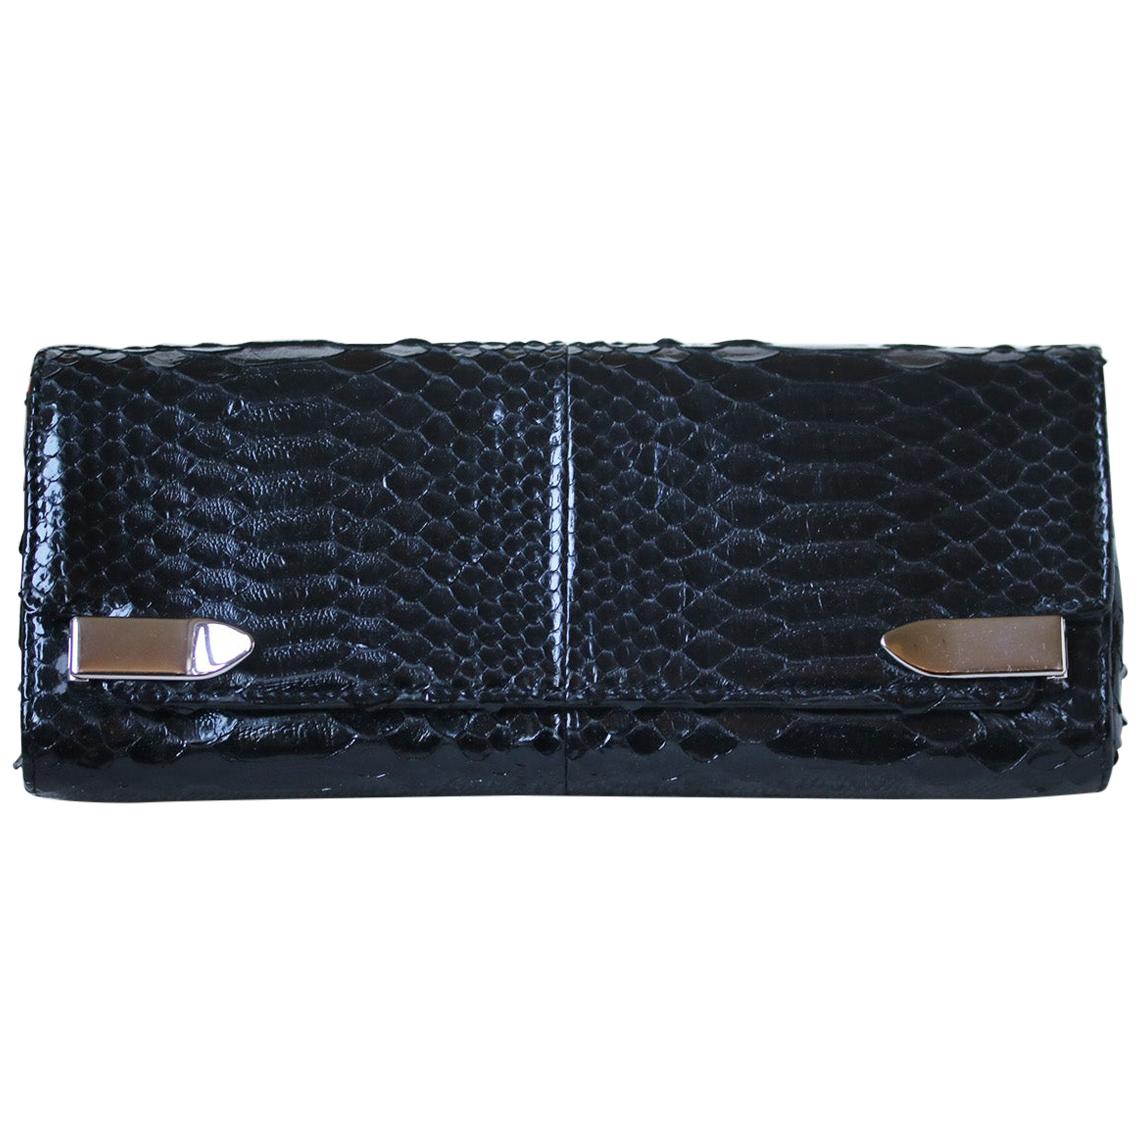 Christian Louboutin Python and Leather Clutch